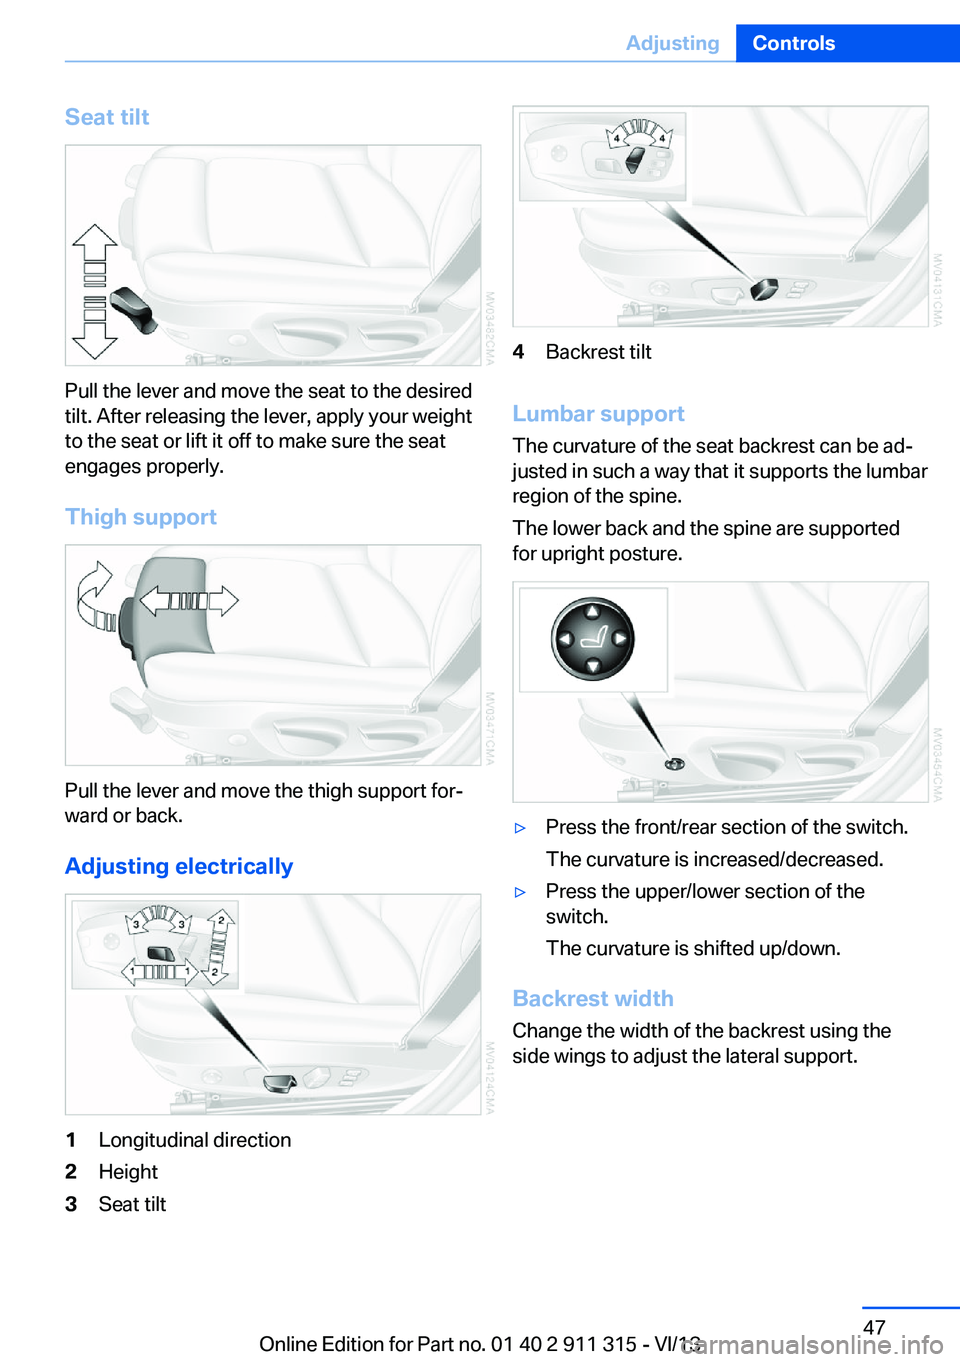 BMW Z4 SDRIVE35I 2014 Service Manual Seat tilt
Pull the lever and move the seat to the desired
tilt. After releasing the lever, apply your weight
to the seat or lift it off to make sure the seat
engages properly.
Thigh support
Pull the l